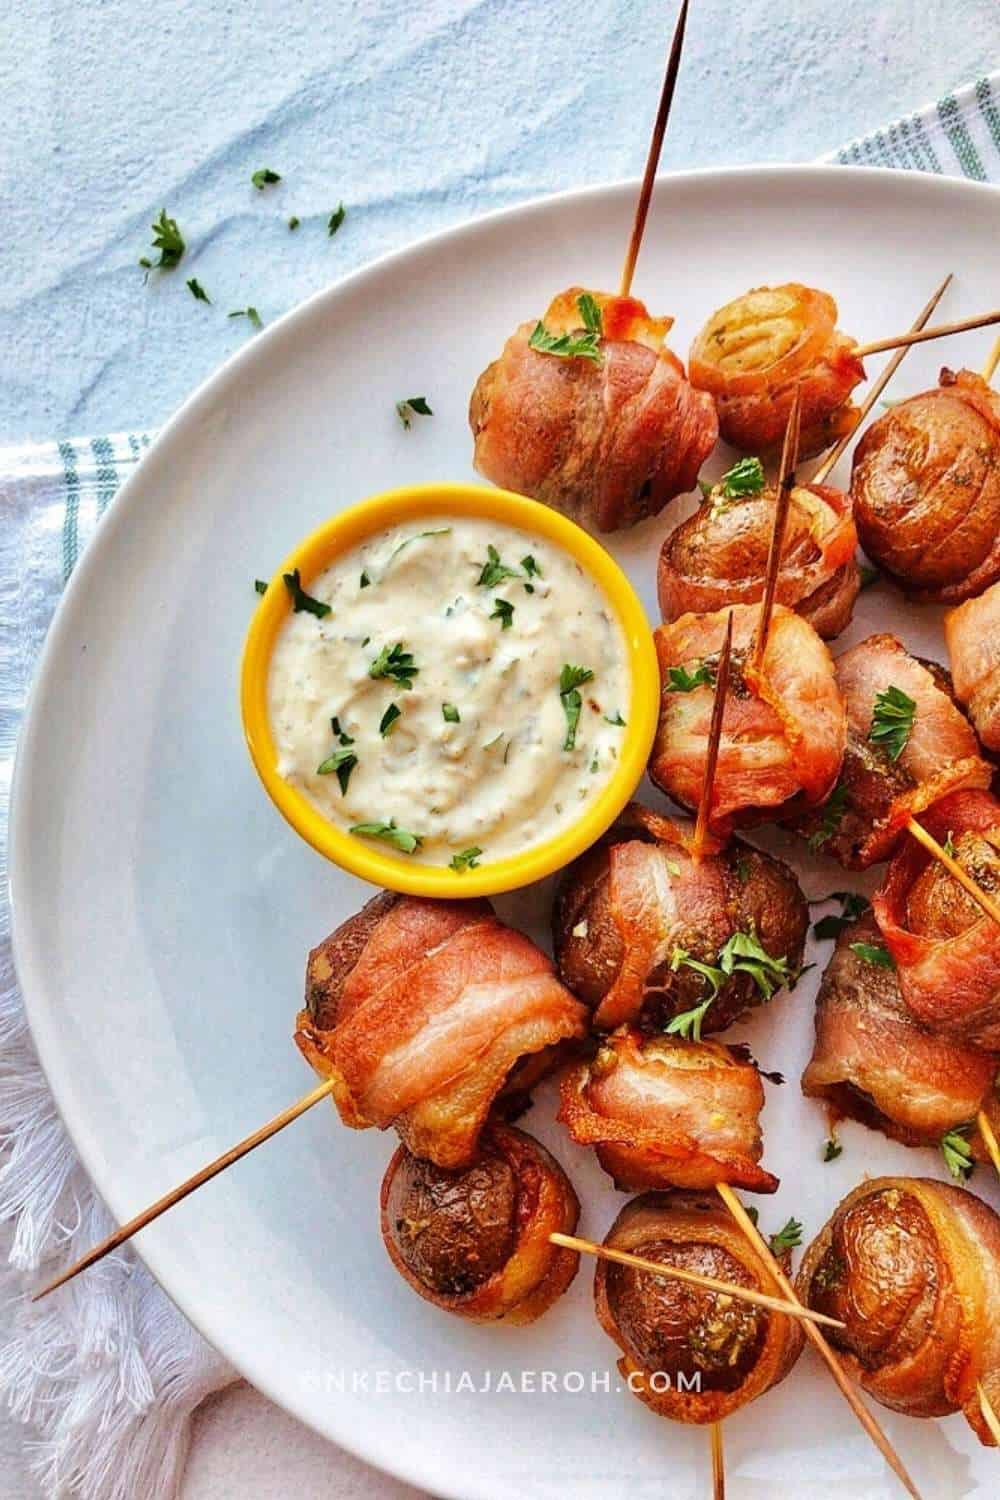 Small potatoes marinated in coconut cream parsley pesto wrapped in bacon and baked to perfection is literal heaven. These bacon wrapped small potatoes are tasty, flavorful, tender and soft inside, perfectly toasted, and crisp outside. Whether you are looking for your family’s next best appetizer, or you are looking for that perfect dish to bring to the next potluck, these babies fit just right because they would please everyone! 
